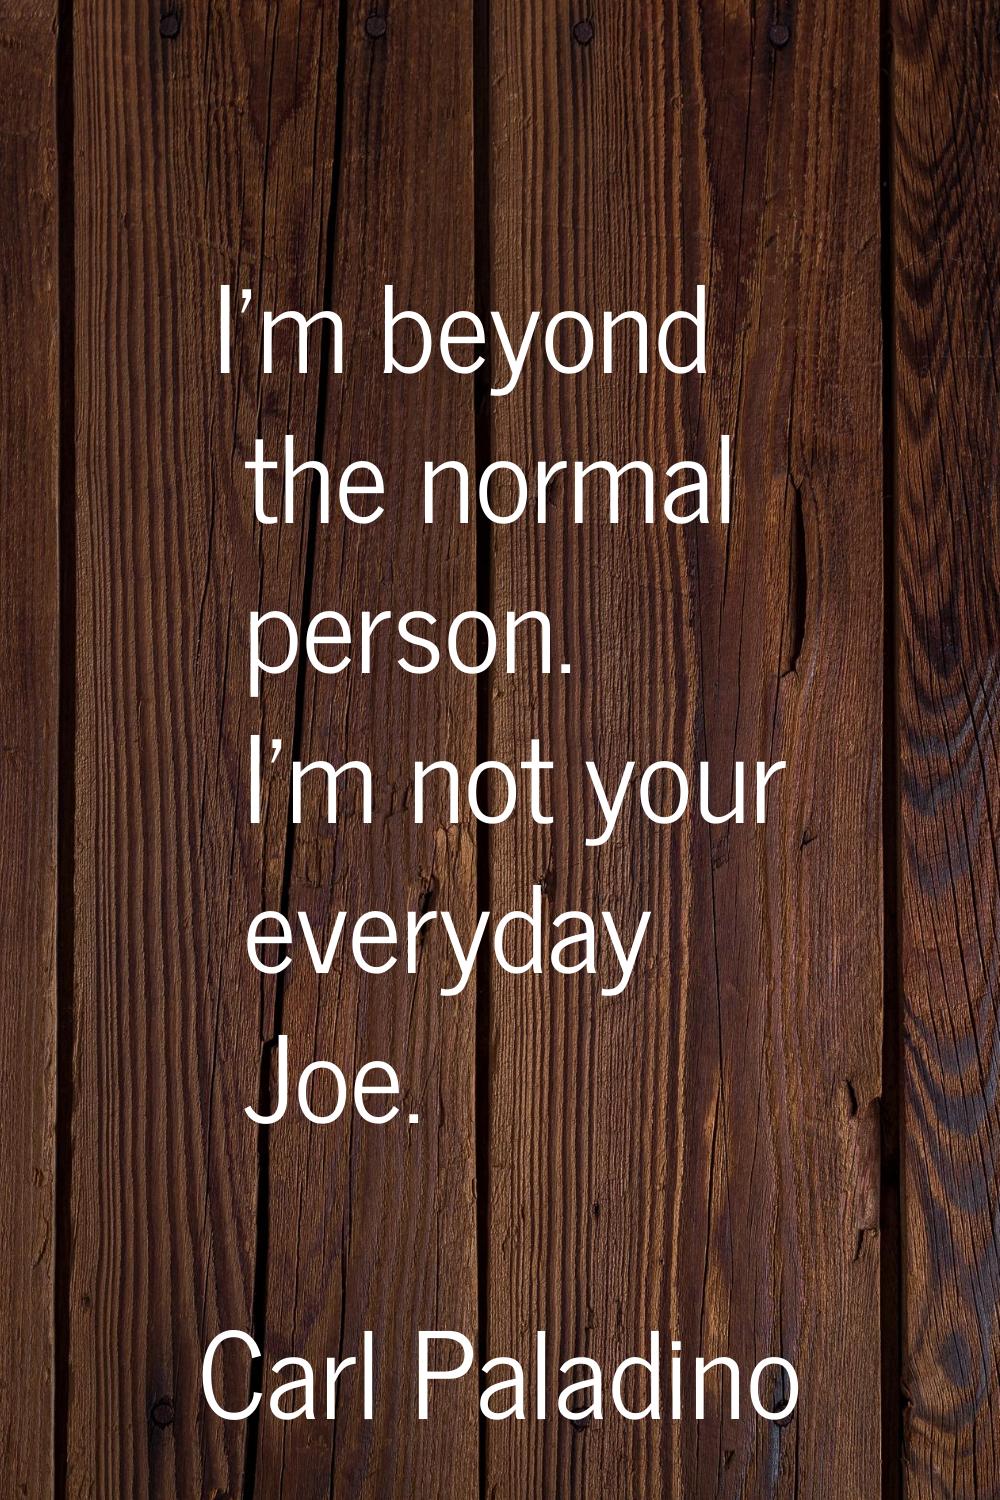 I'm beyond the normal person. I'm not your everyday Joe.